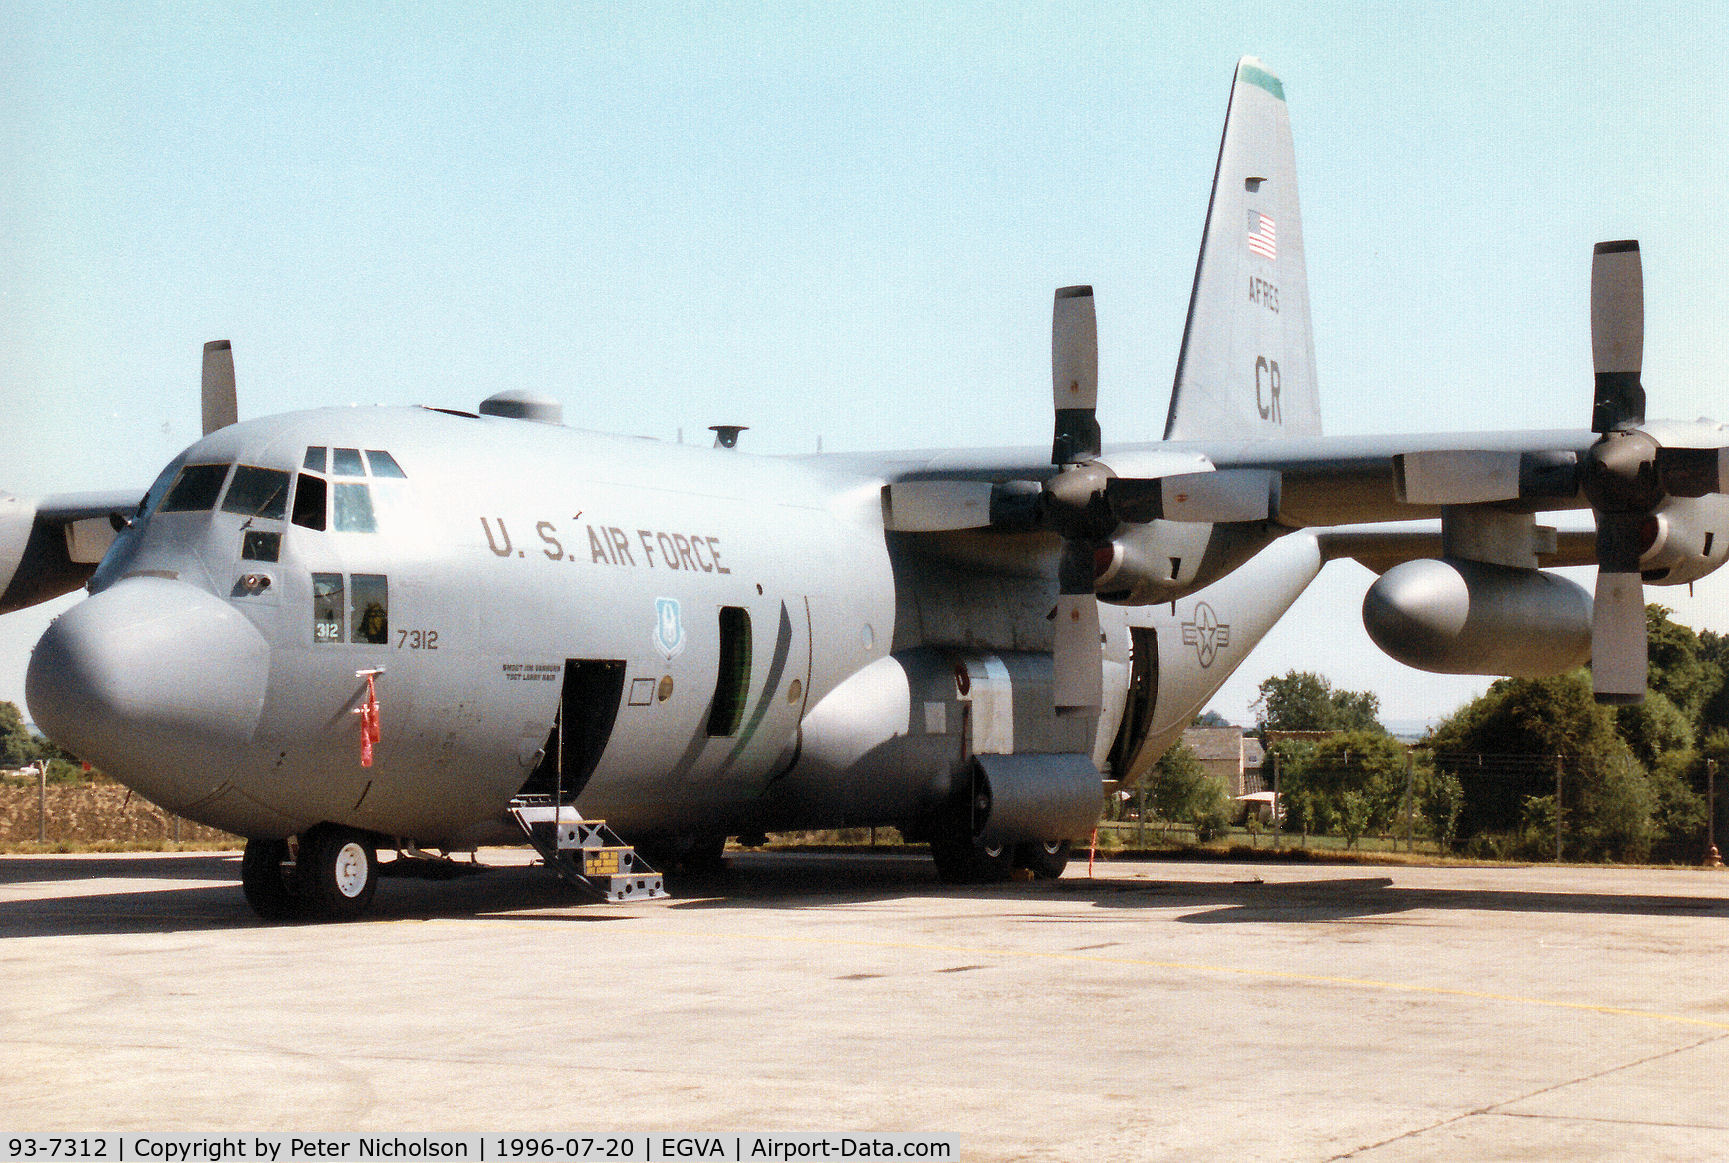 93-7312, 1993 Lockheed C-130H Hercules C/N 382-5377, C-130H Hercules of the 731st Airlift Squadron at Peterson AFB on display at the 1996 Royal Intnl Air Tattoo at RAF Fairford.